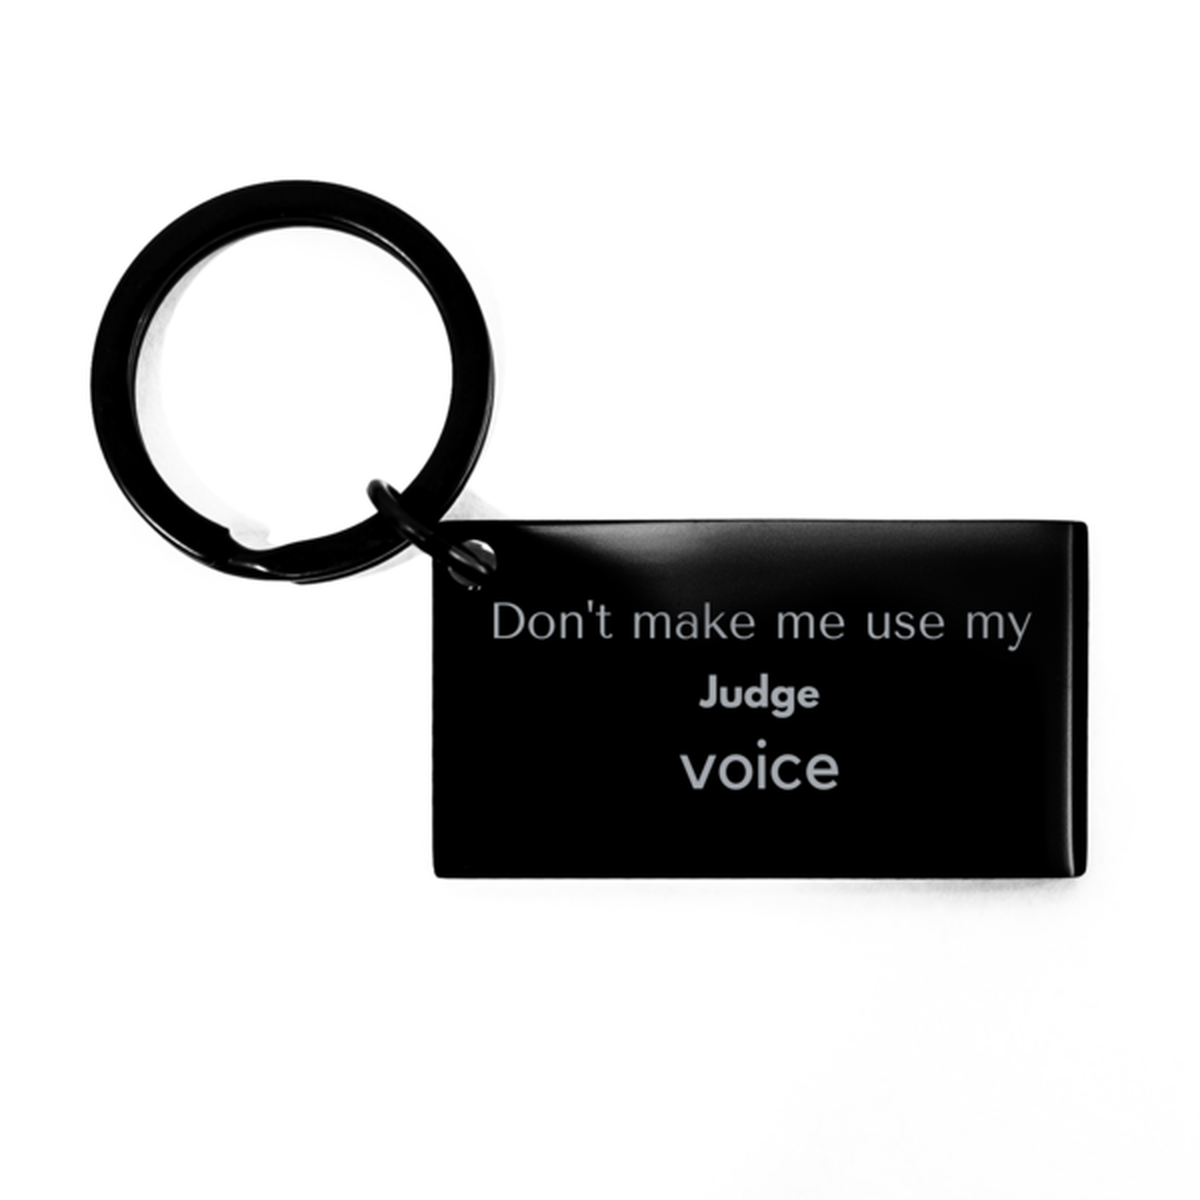 Don't make me use my Judge voice, Sarcasm Judge Gifts, Christmas Judge Keychain Birthday Unique Gifts For Judge Coworkers, Men, Women, Colleague, Friends